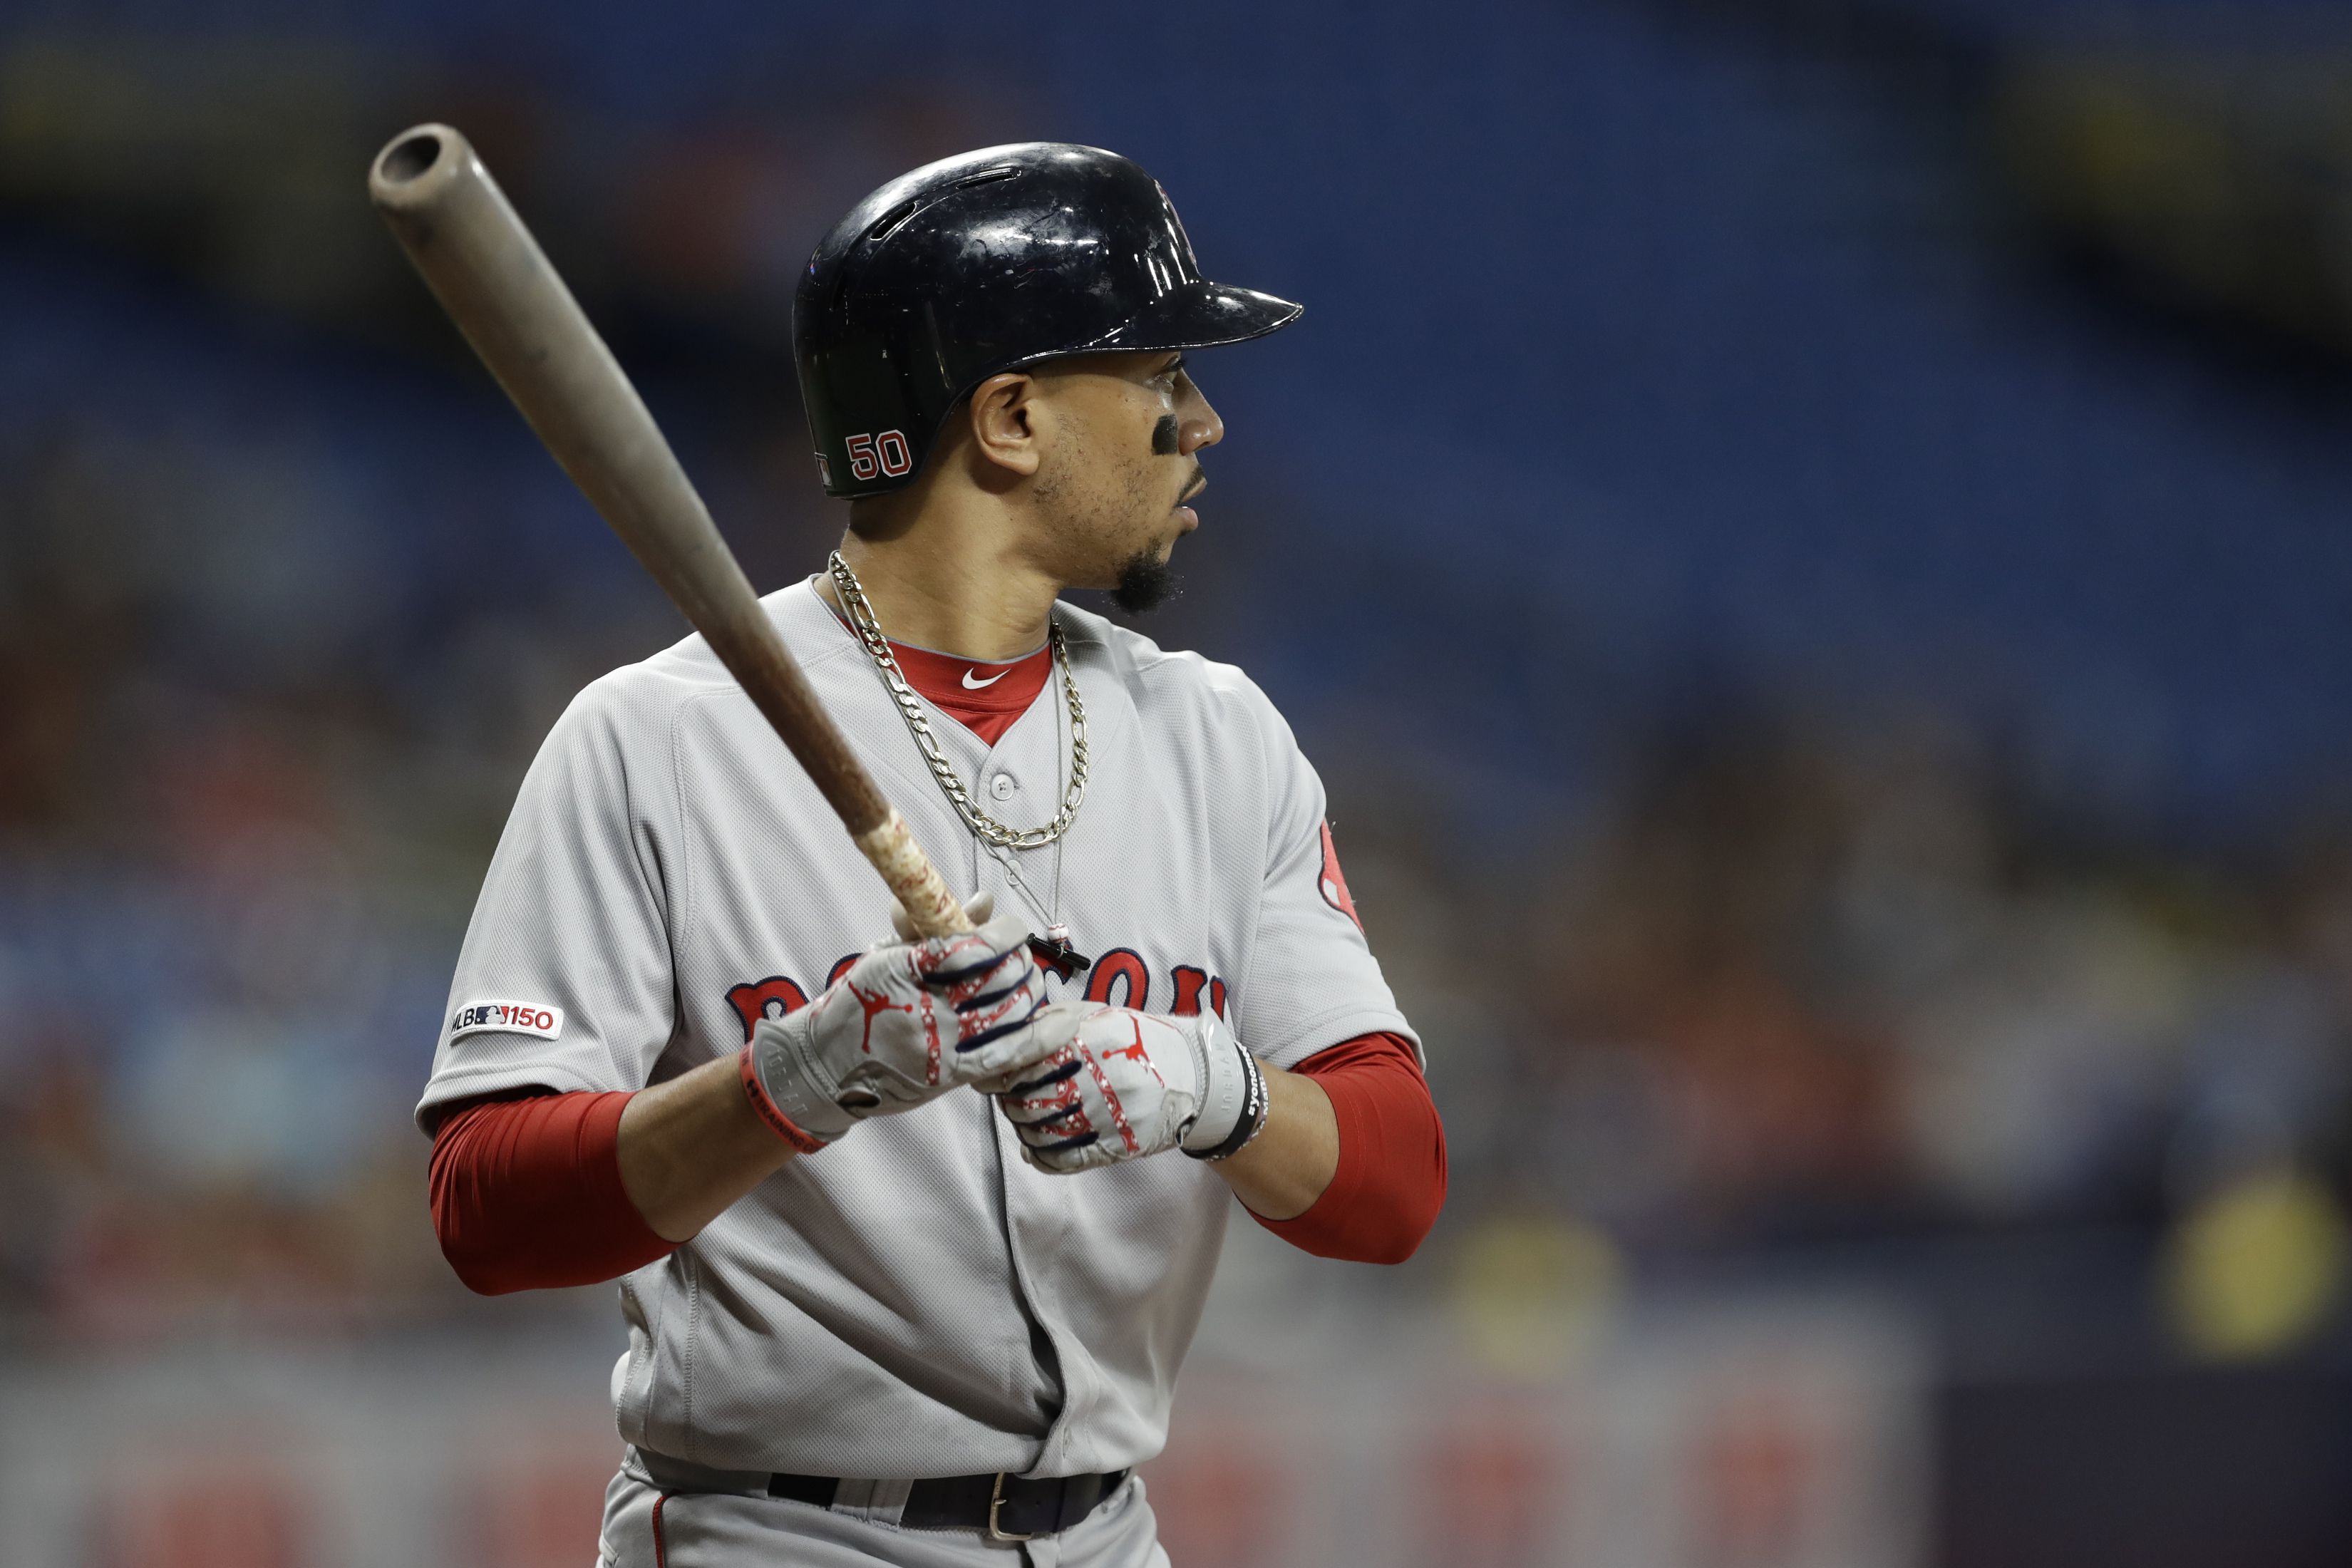 Red Sox' decision to trade Mookie Betts could come within days, sources say  - The Boston Globe